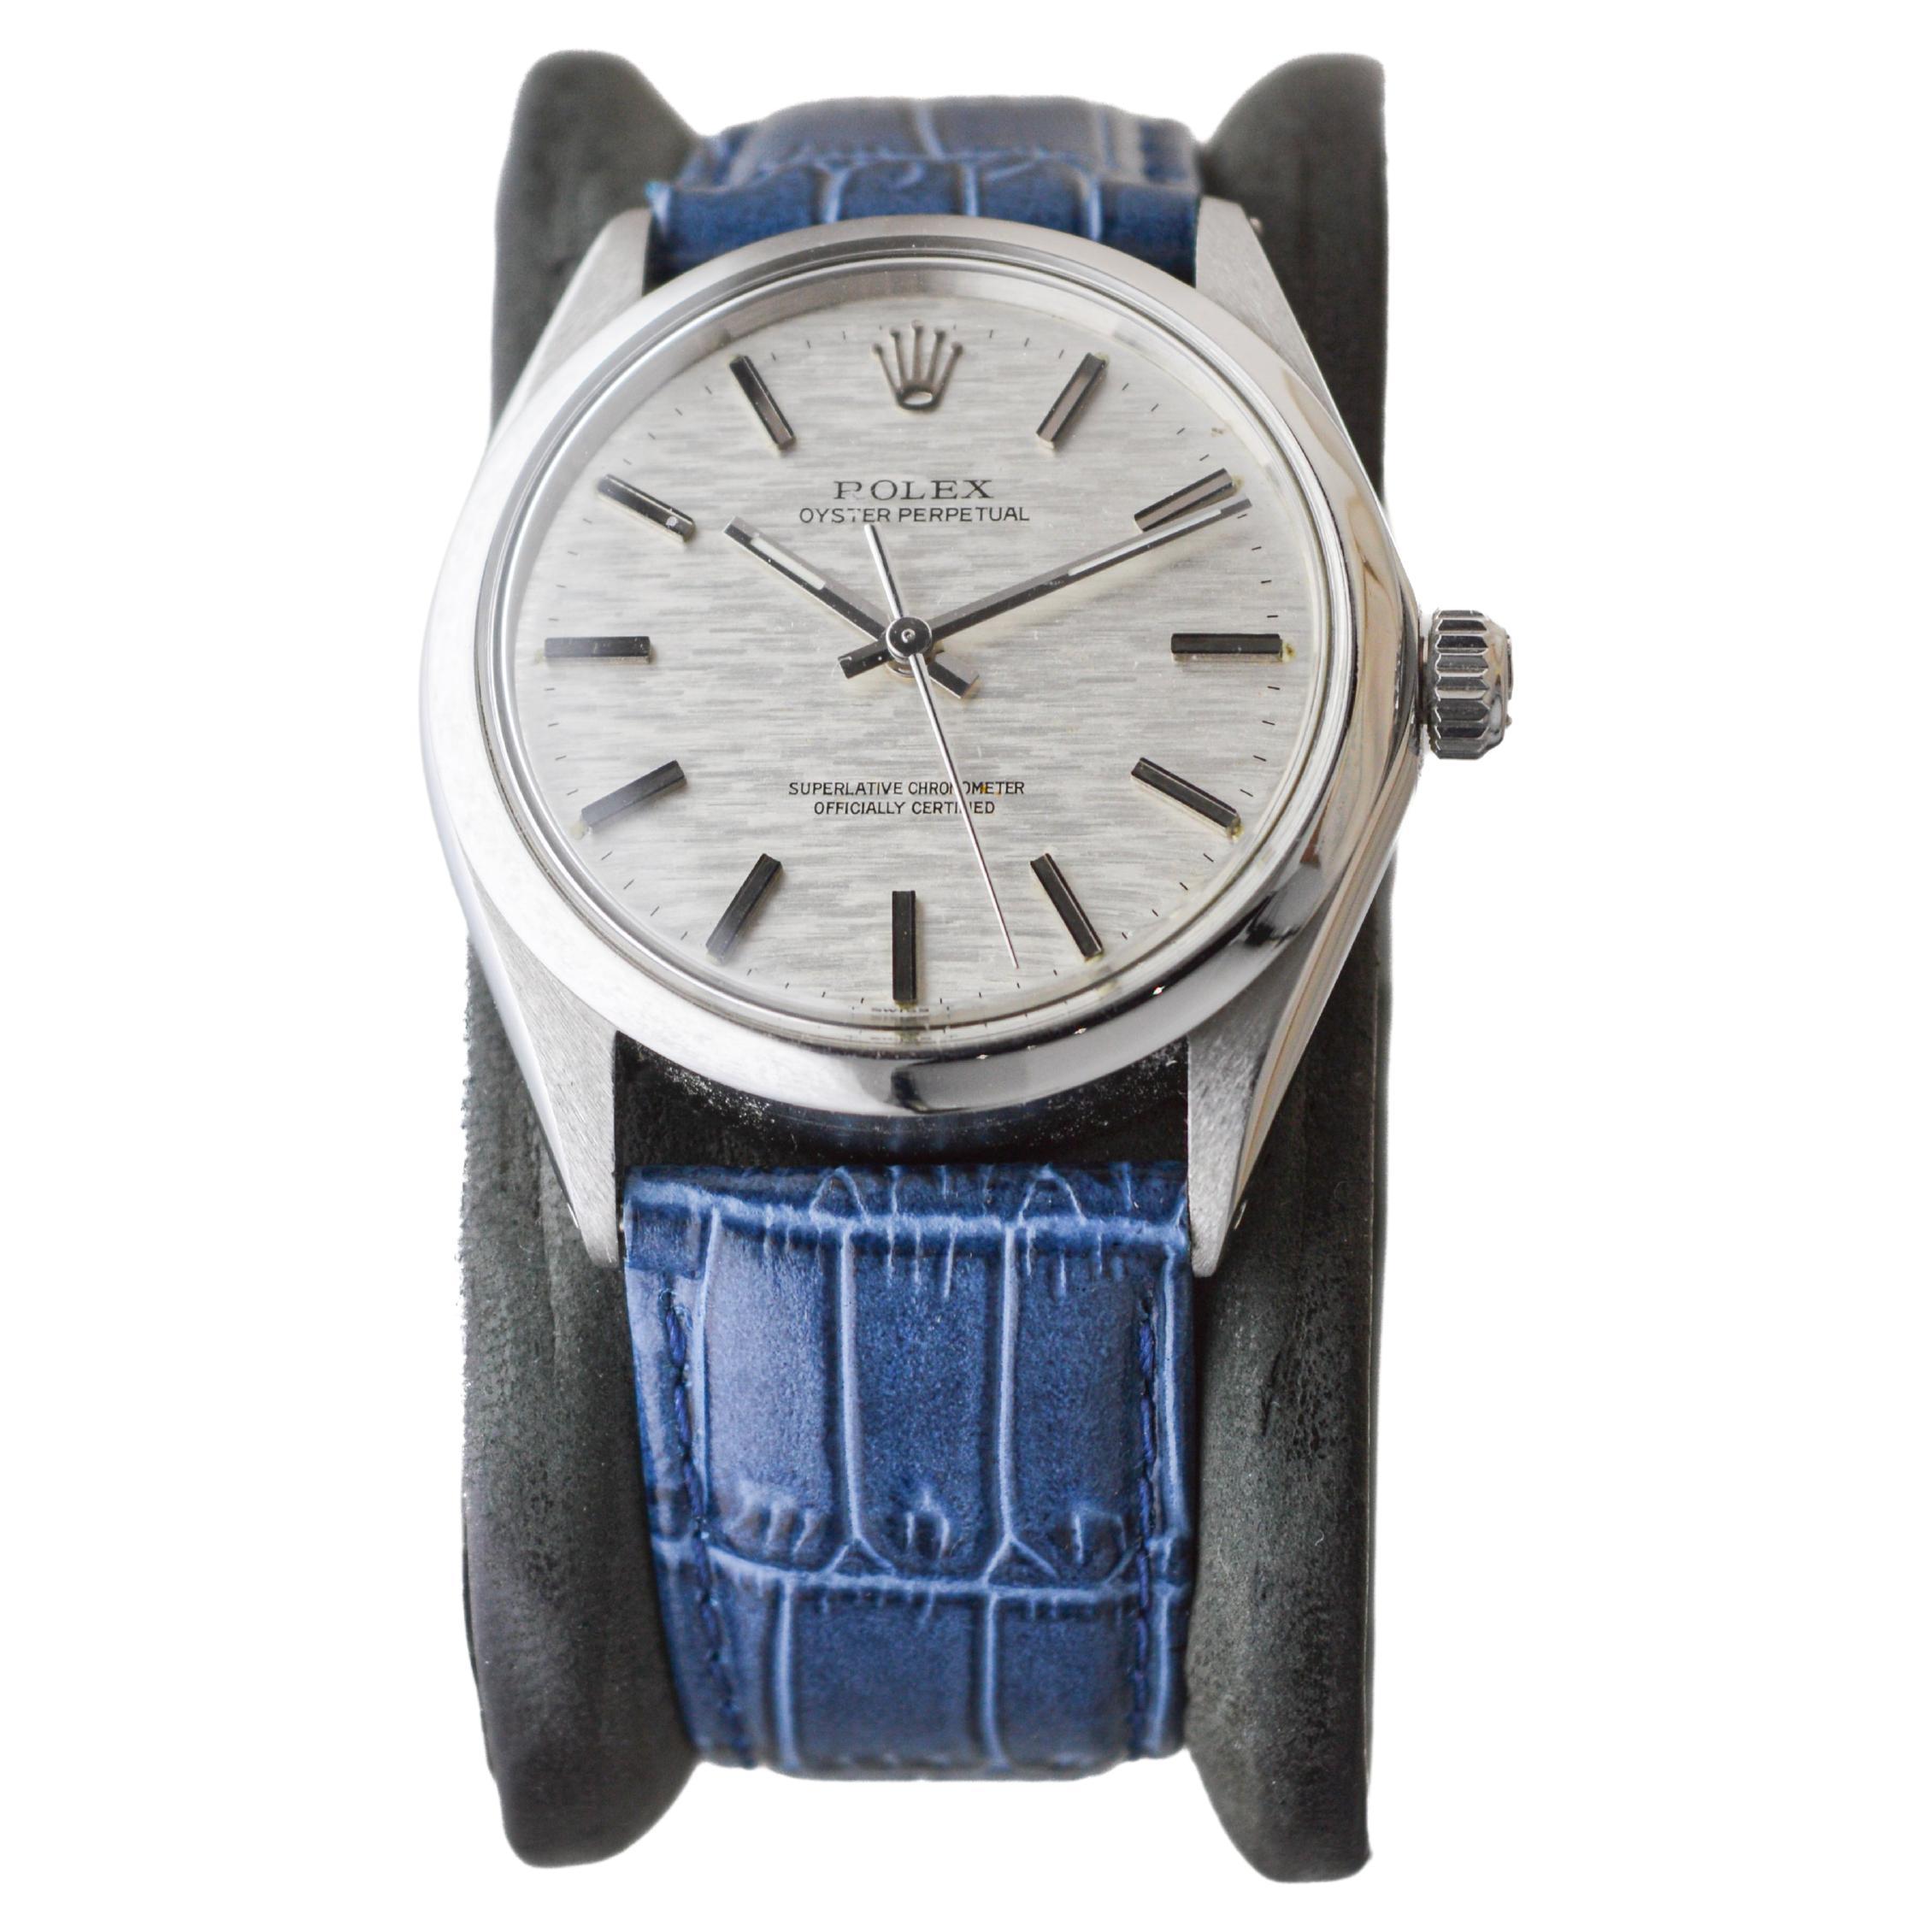 Modern Rolex Steel Oyster Perpetual with Factory Original Mosaic Dial circa 1973 / 74 For Sale